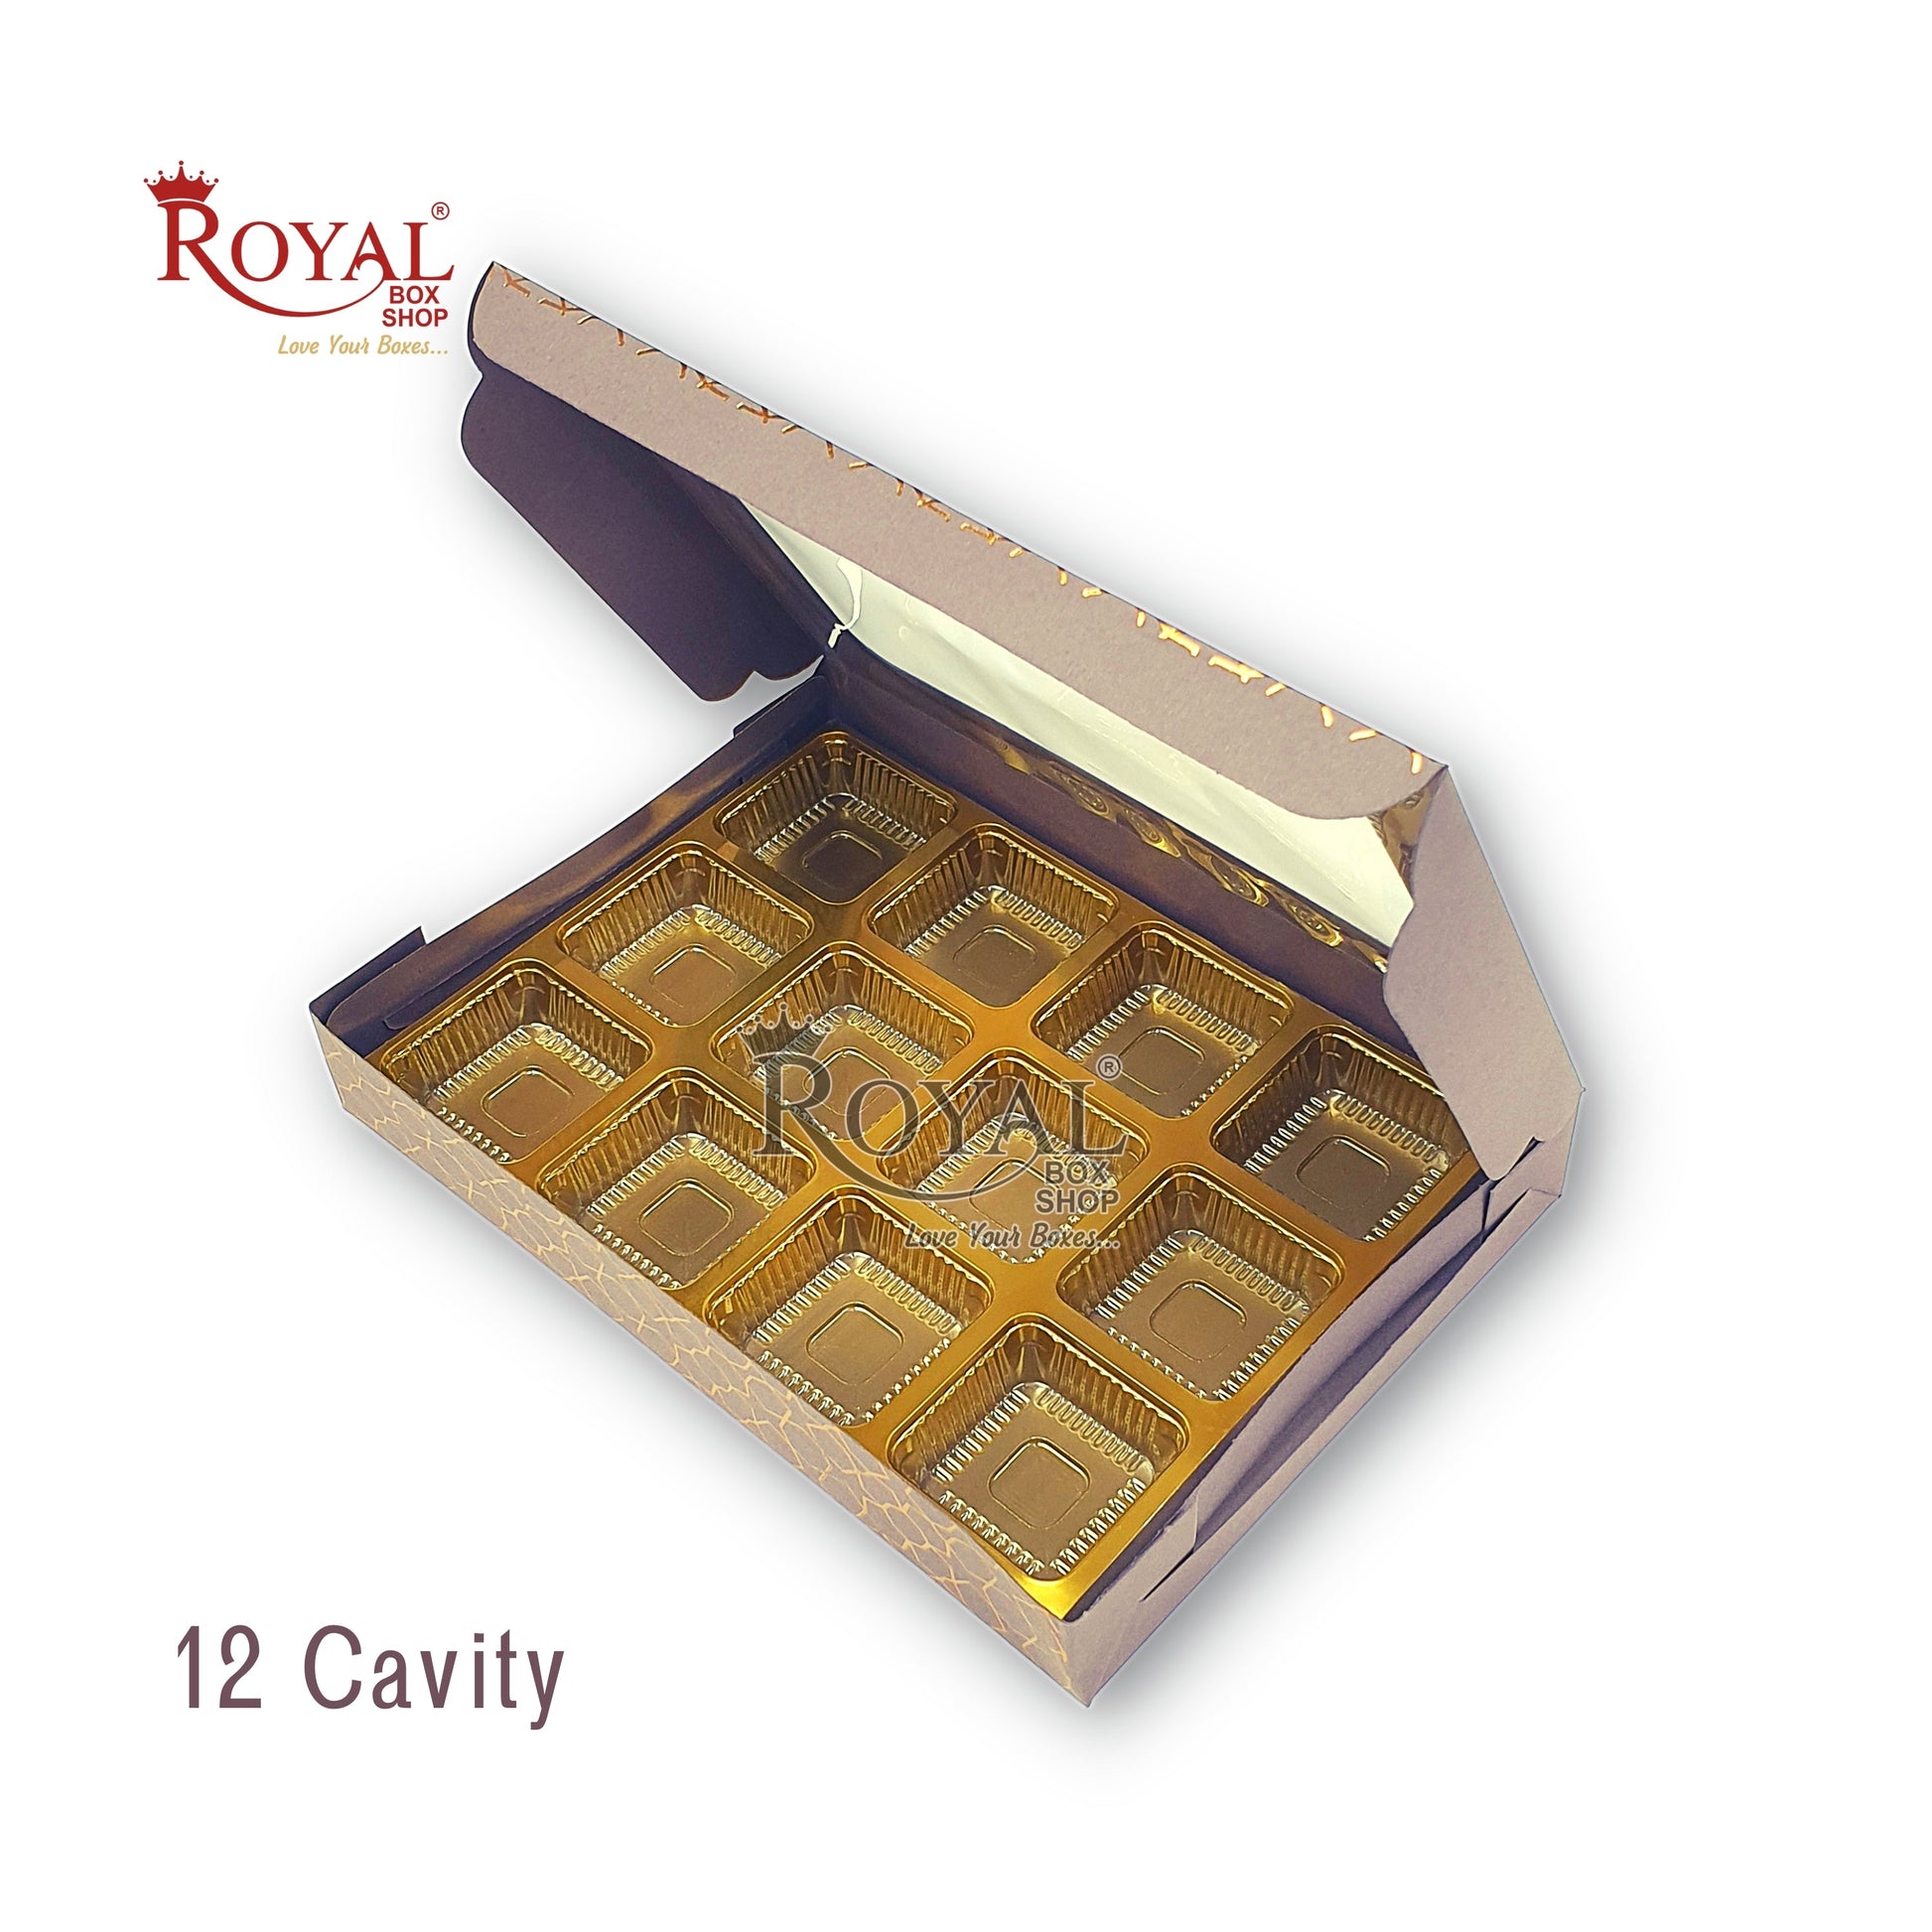 12 Cavity Chocolate Boxes I 7.5 x 5.5 x 1.25 inches I Brown Hexa Golden Foiling I For Valentine, Rakhi, Return Gifts Royal Box Shop